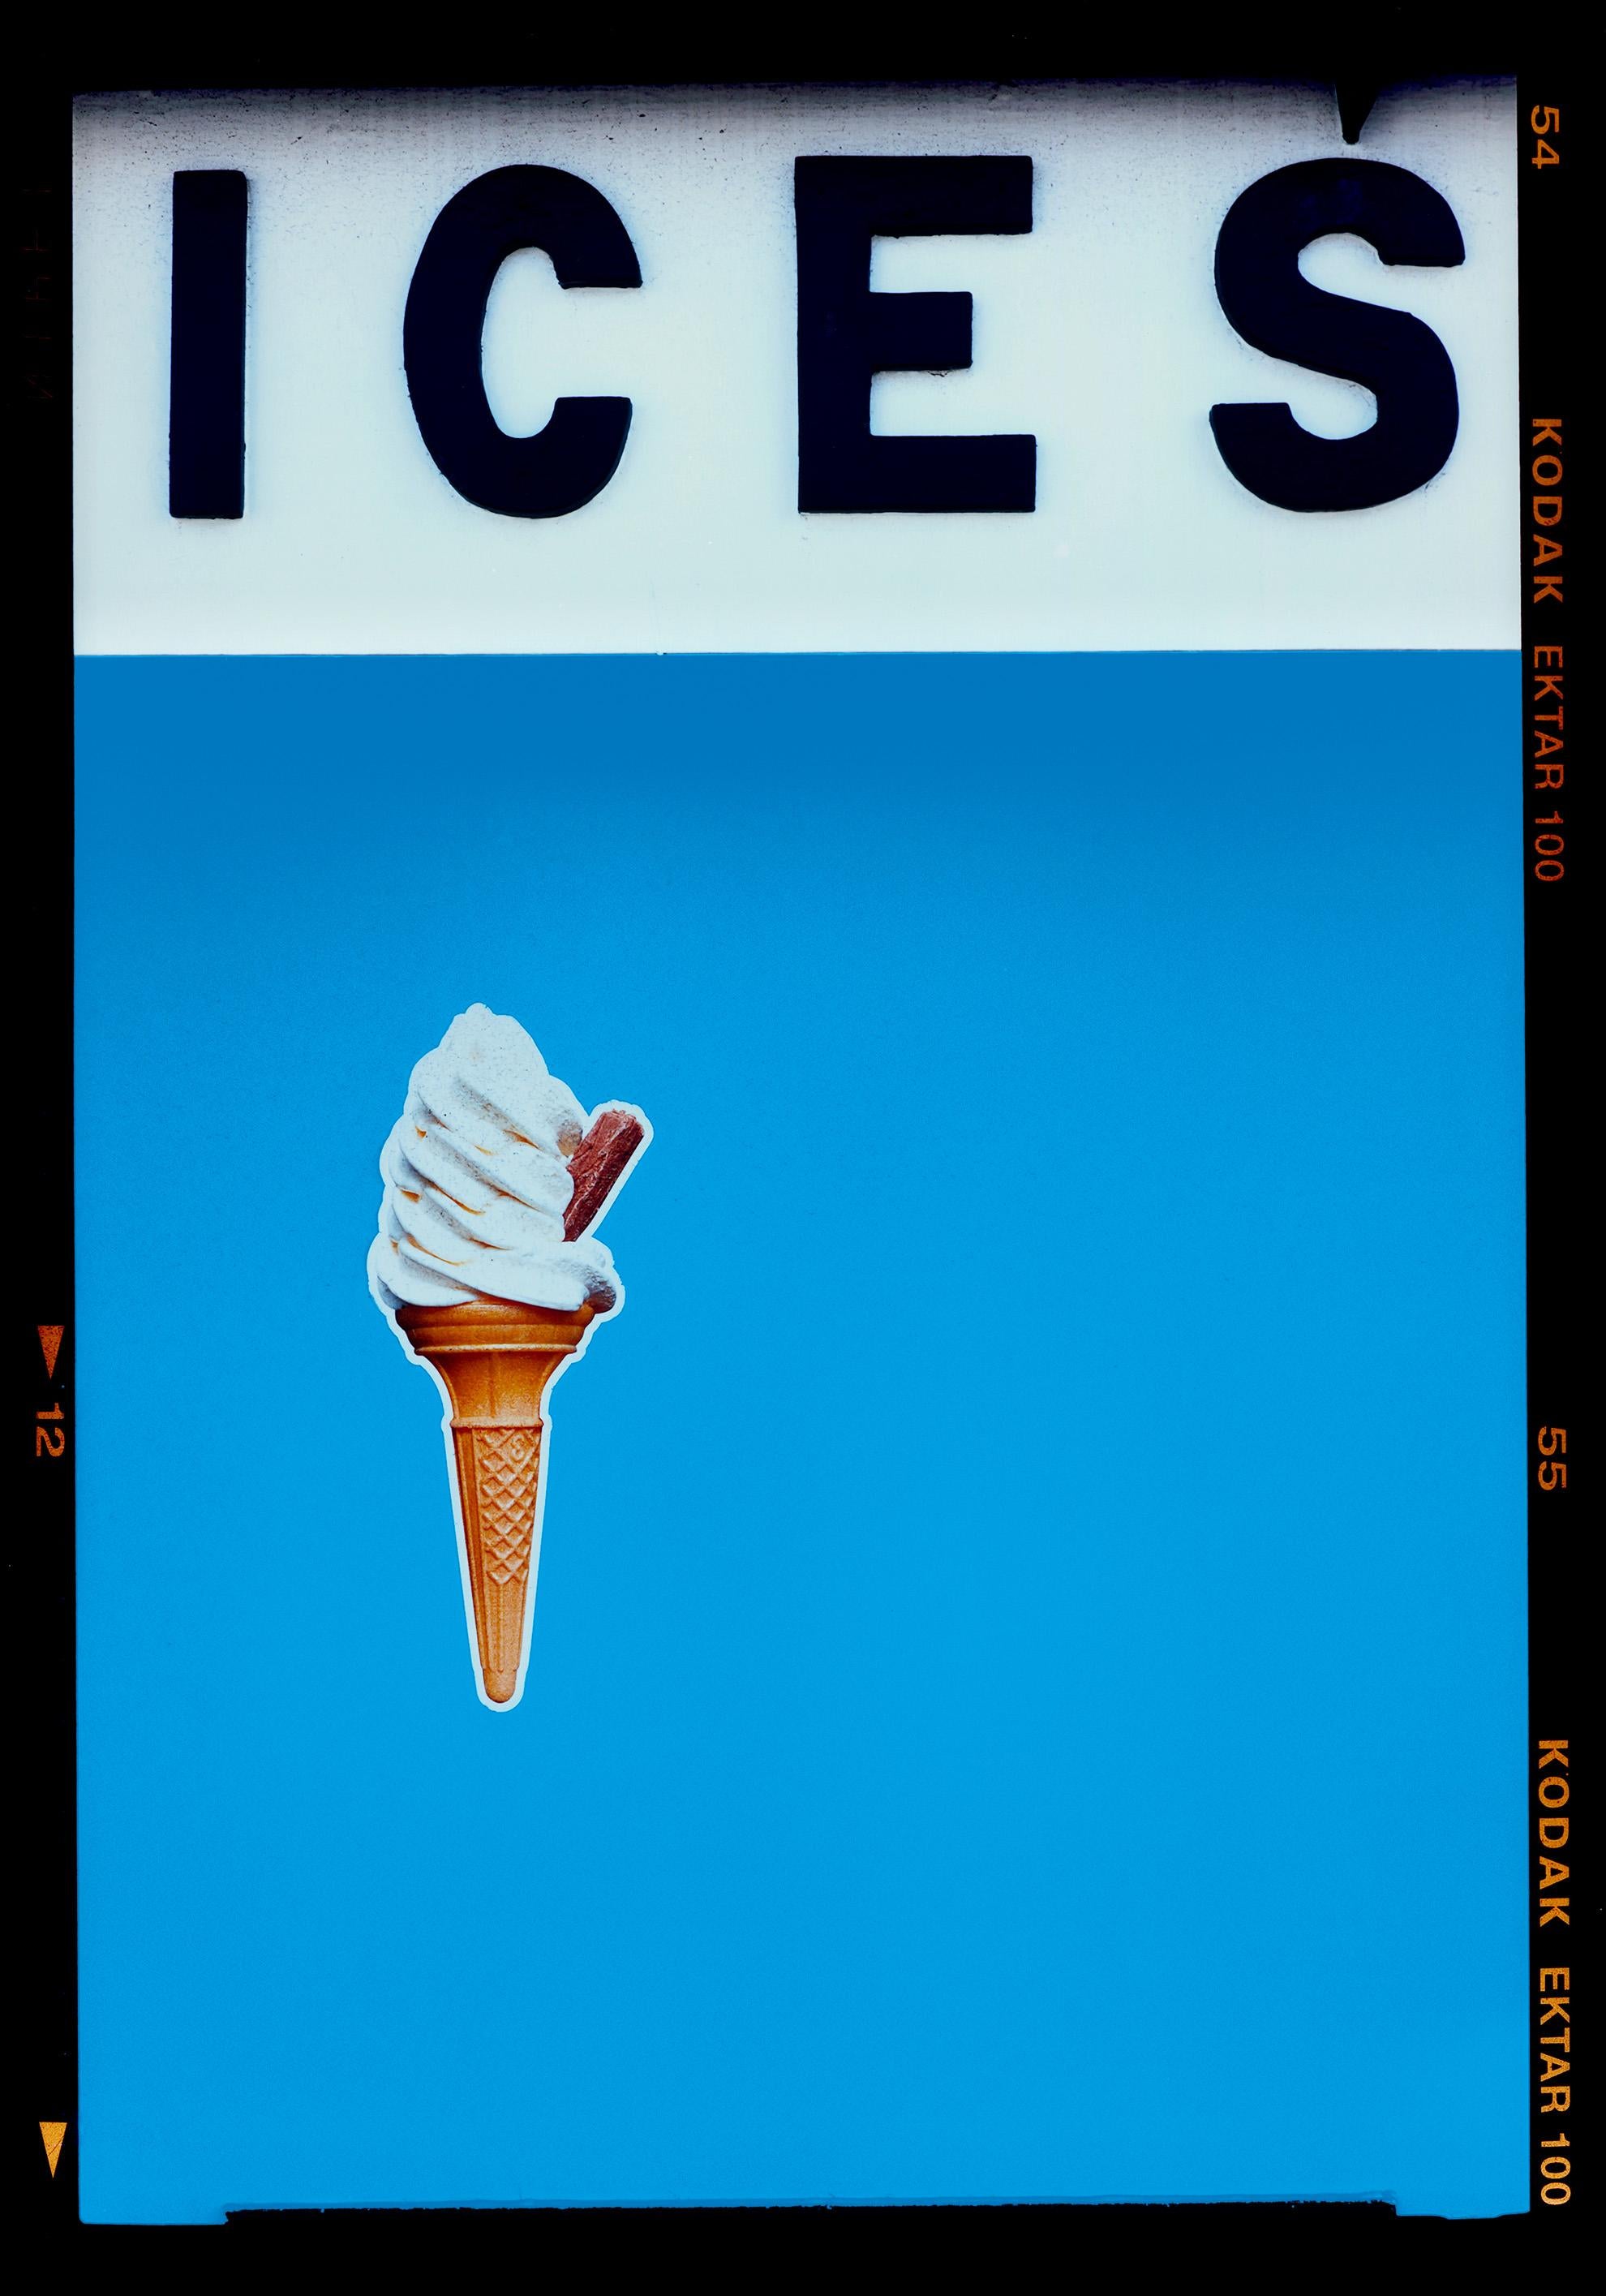 Richard Heeps Print - Ices (Sky Blue), Bexhill-on-Sea - British seaside color photography